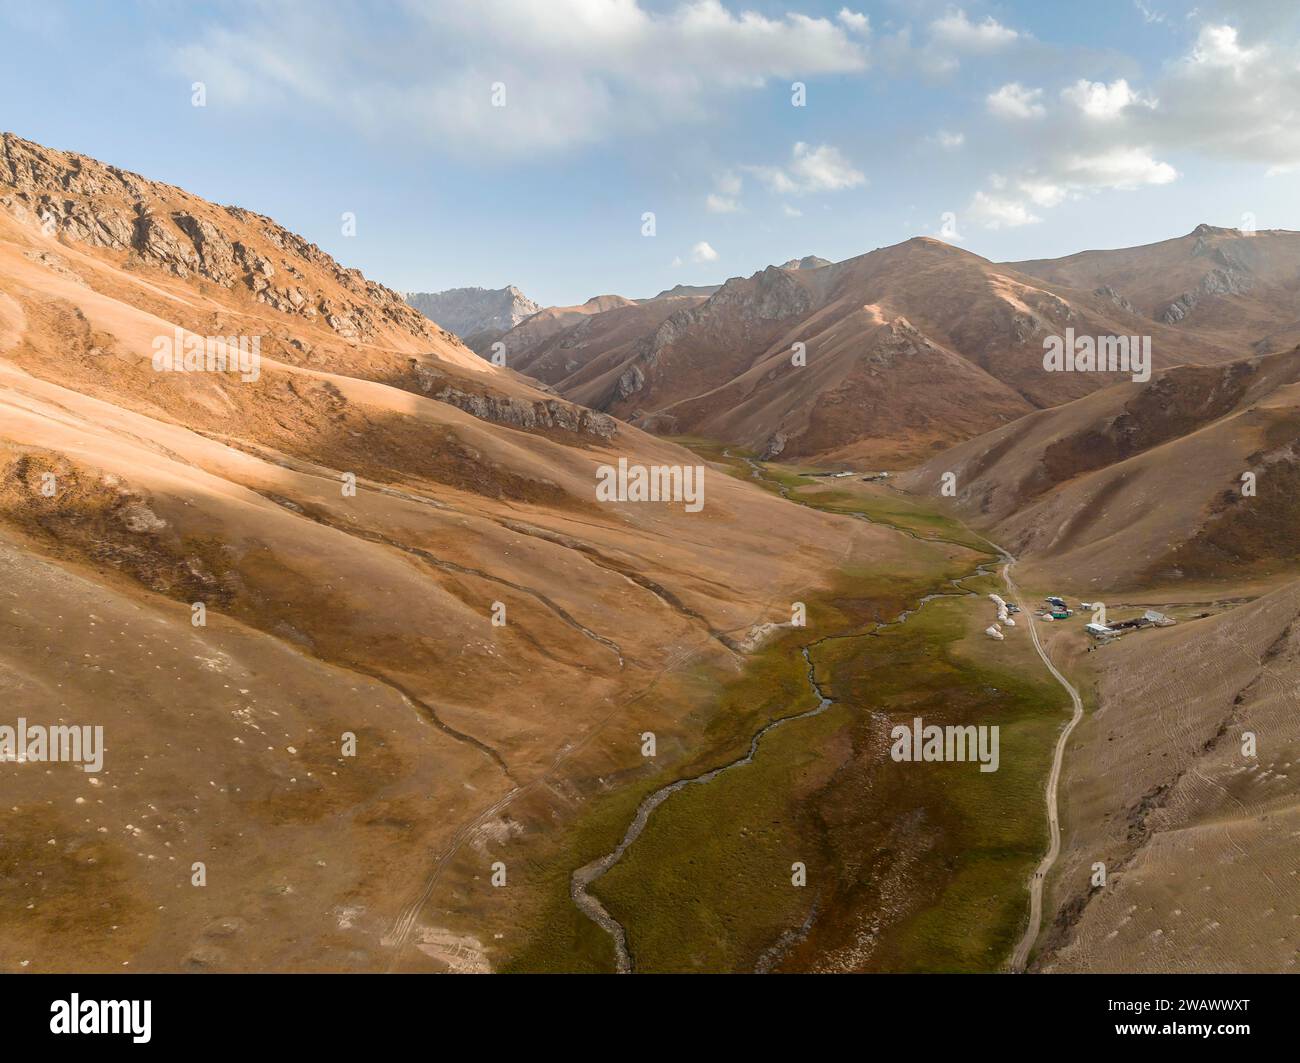 Aerial view of mountain valley with gravel road, Naryn region, Kyrgyzstan Stock Photo